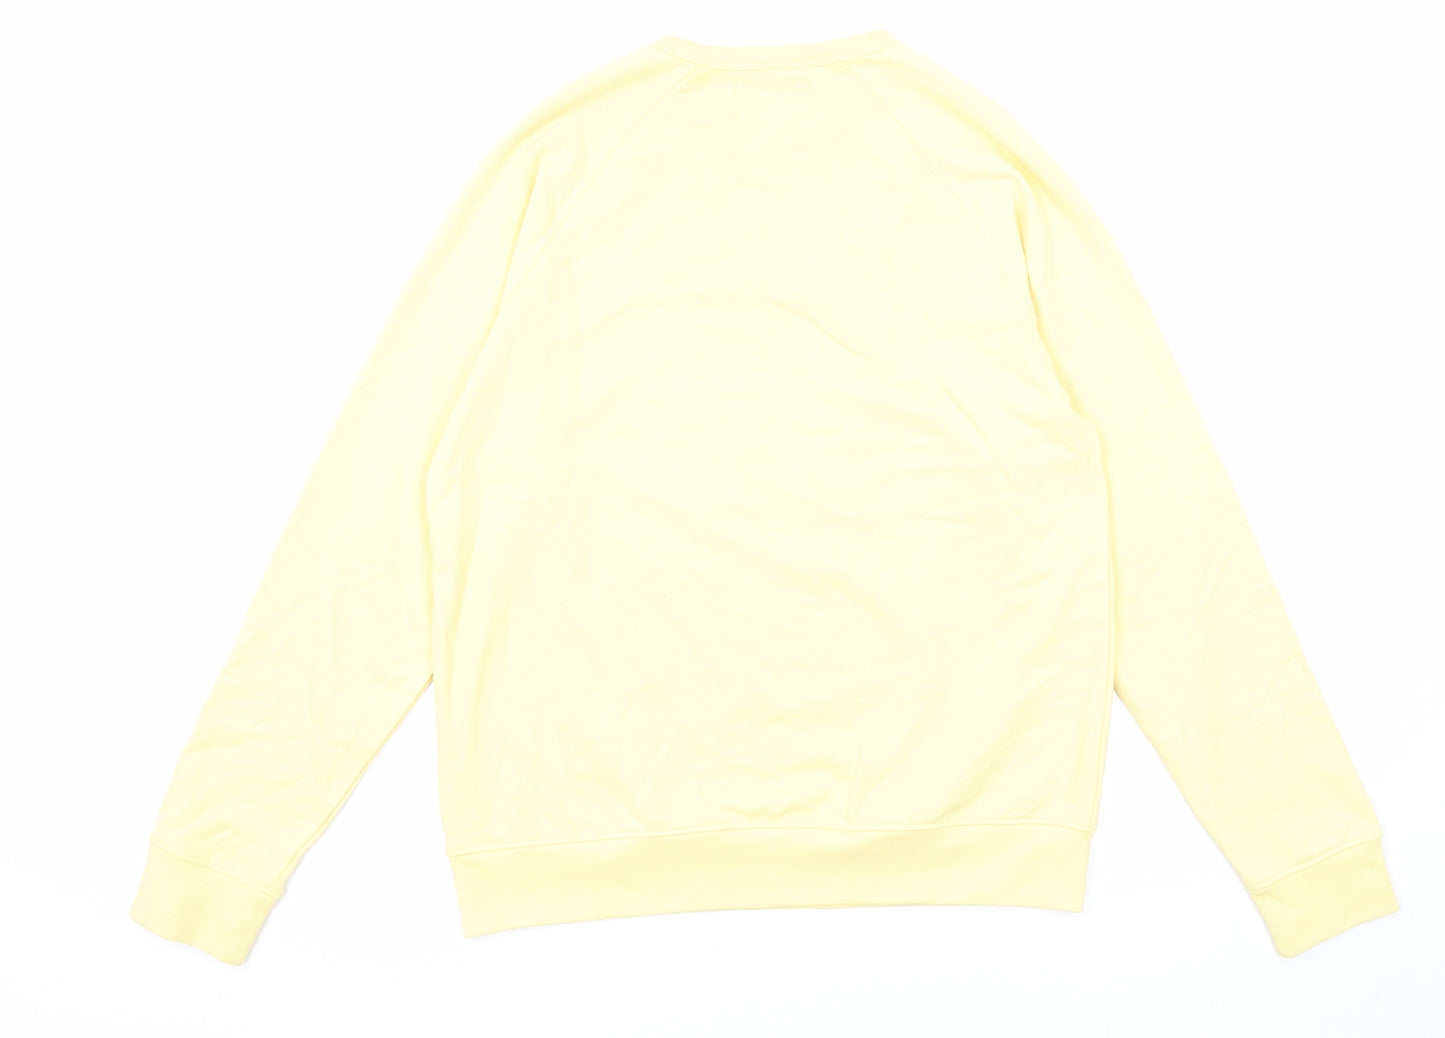 Marks and Spencer Mens Yellow Cotton Pullover Sweatshirt Size S